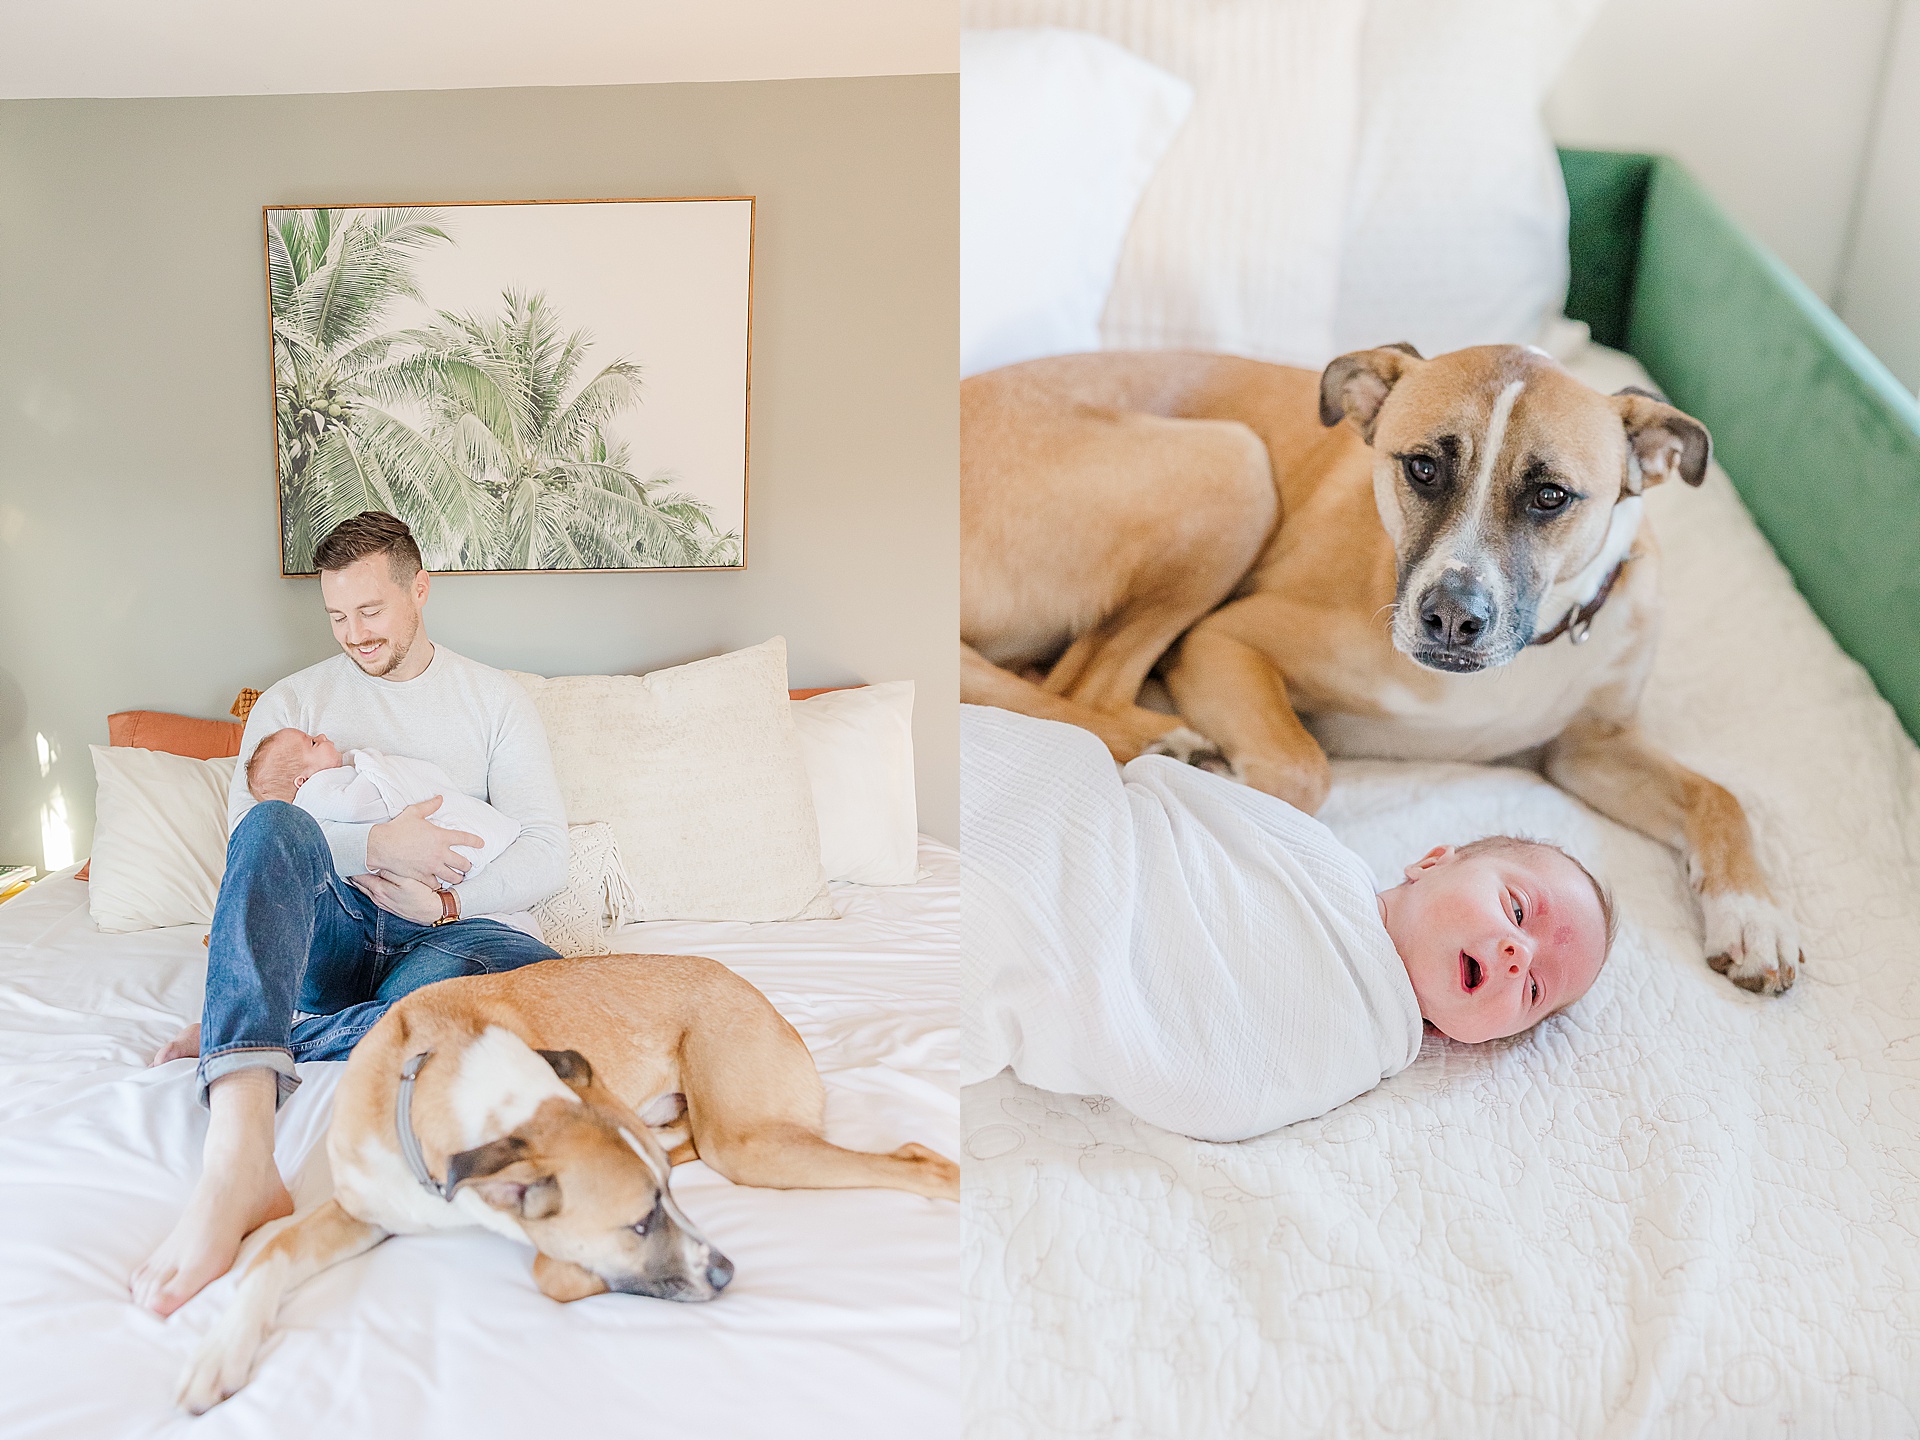 Dad lays on bed with dog and baby during in home newborn photo session for NICU baby in Natick Massachusetts